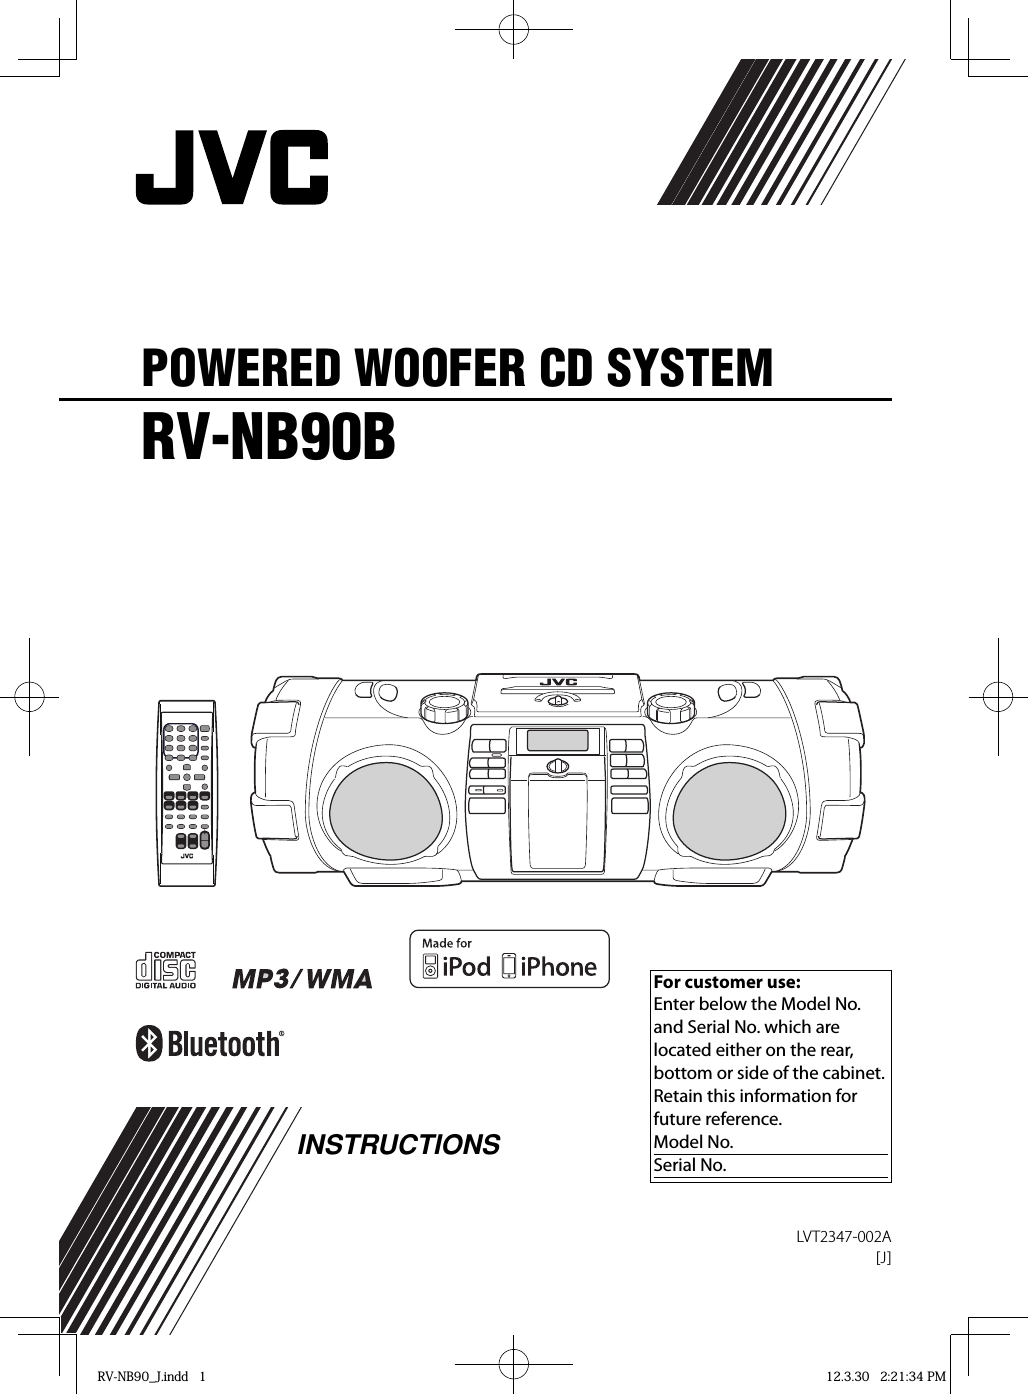 POWERED WOOFER CD SYSTEMRV-NB90BLVT2347-002A[J]INSTRUCTIONS For customer use:Enter below the Model No. and Serial No. which are located either on the rear, bottom or side of the cabinet. Retain this information for future reference.Model No.Serial No.RV-NB90_J.indd   1RV-NB90_J.indd   1 12.3.30   2:21:34 PM12.3.30   2:21:34 PM